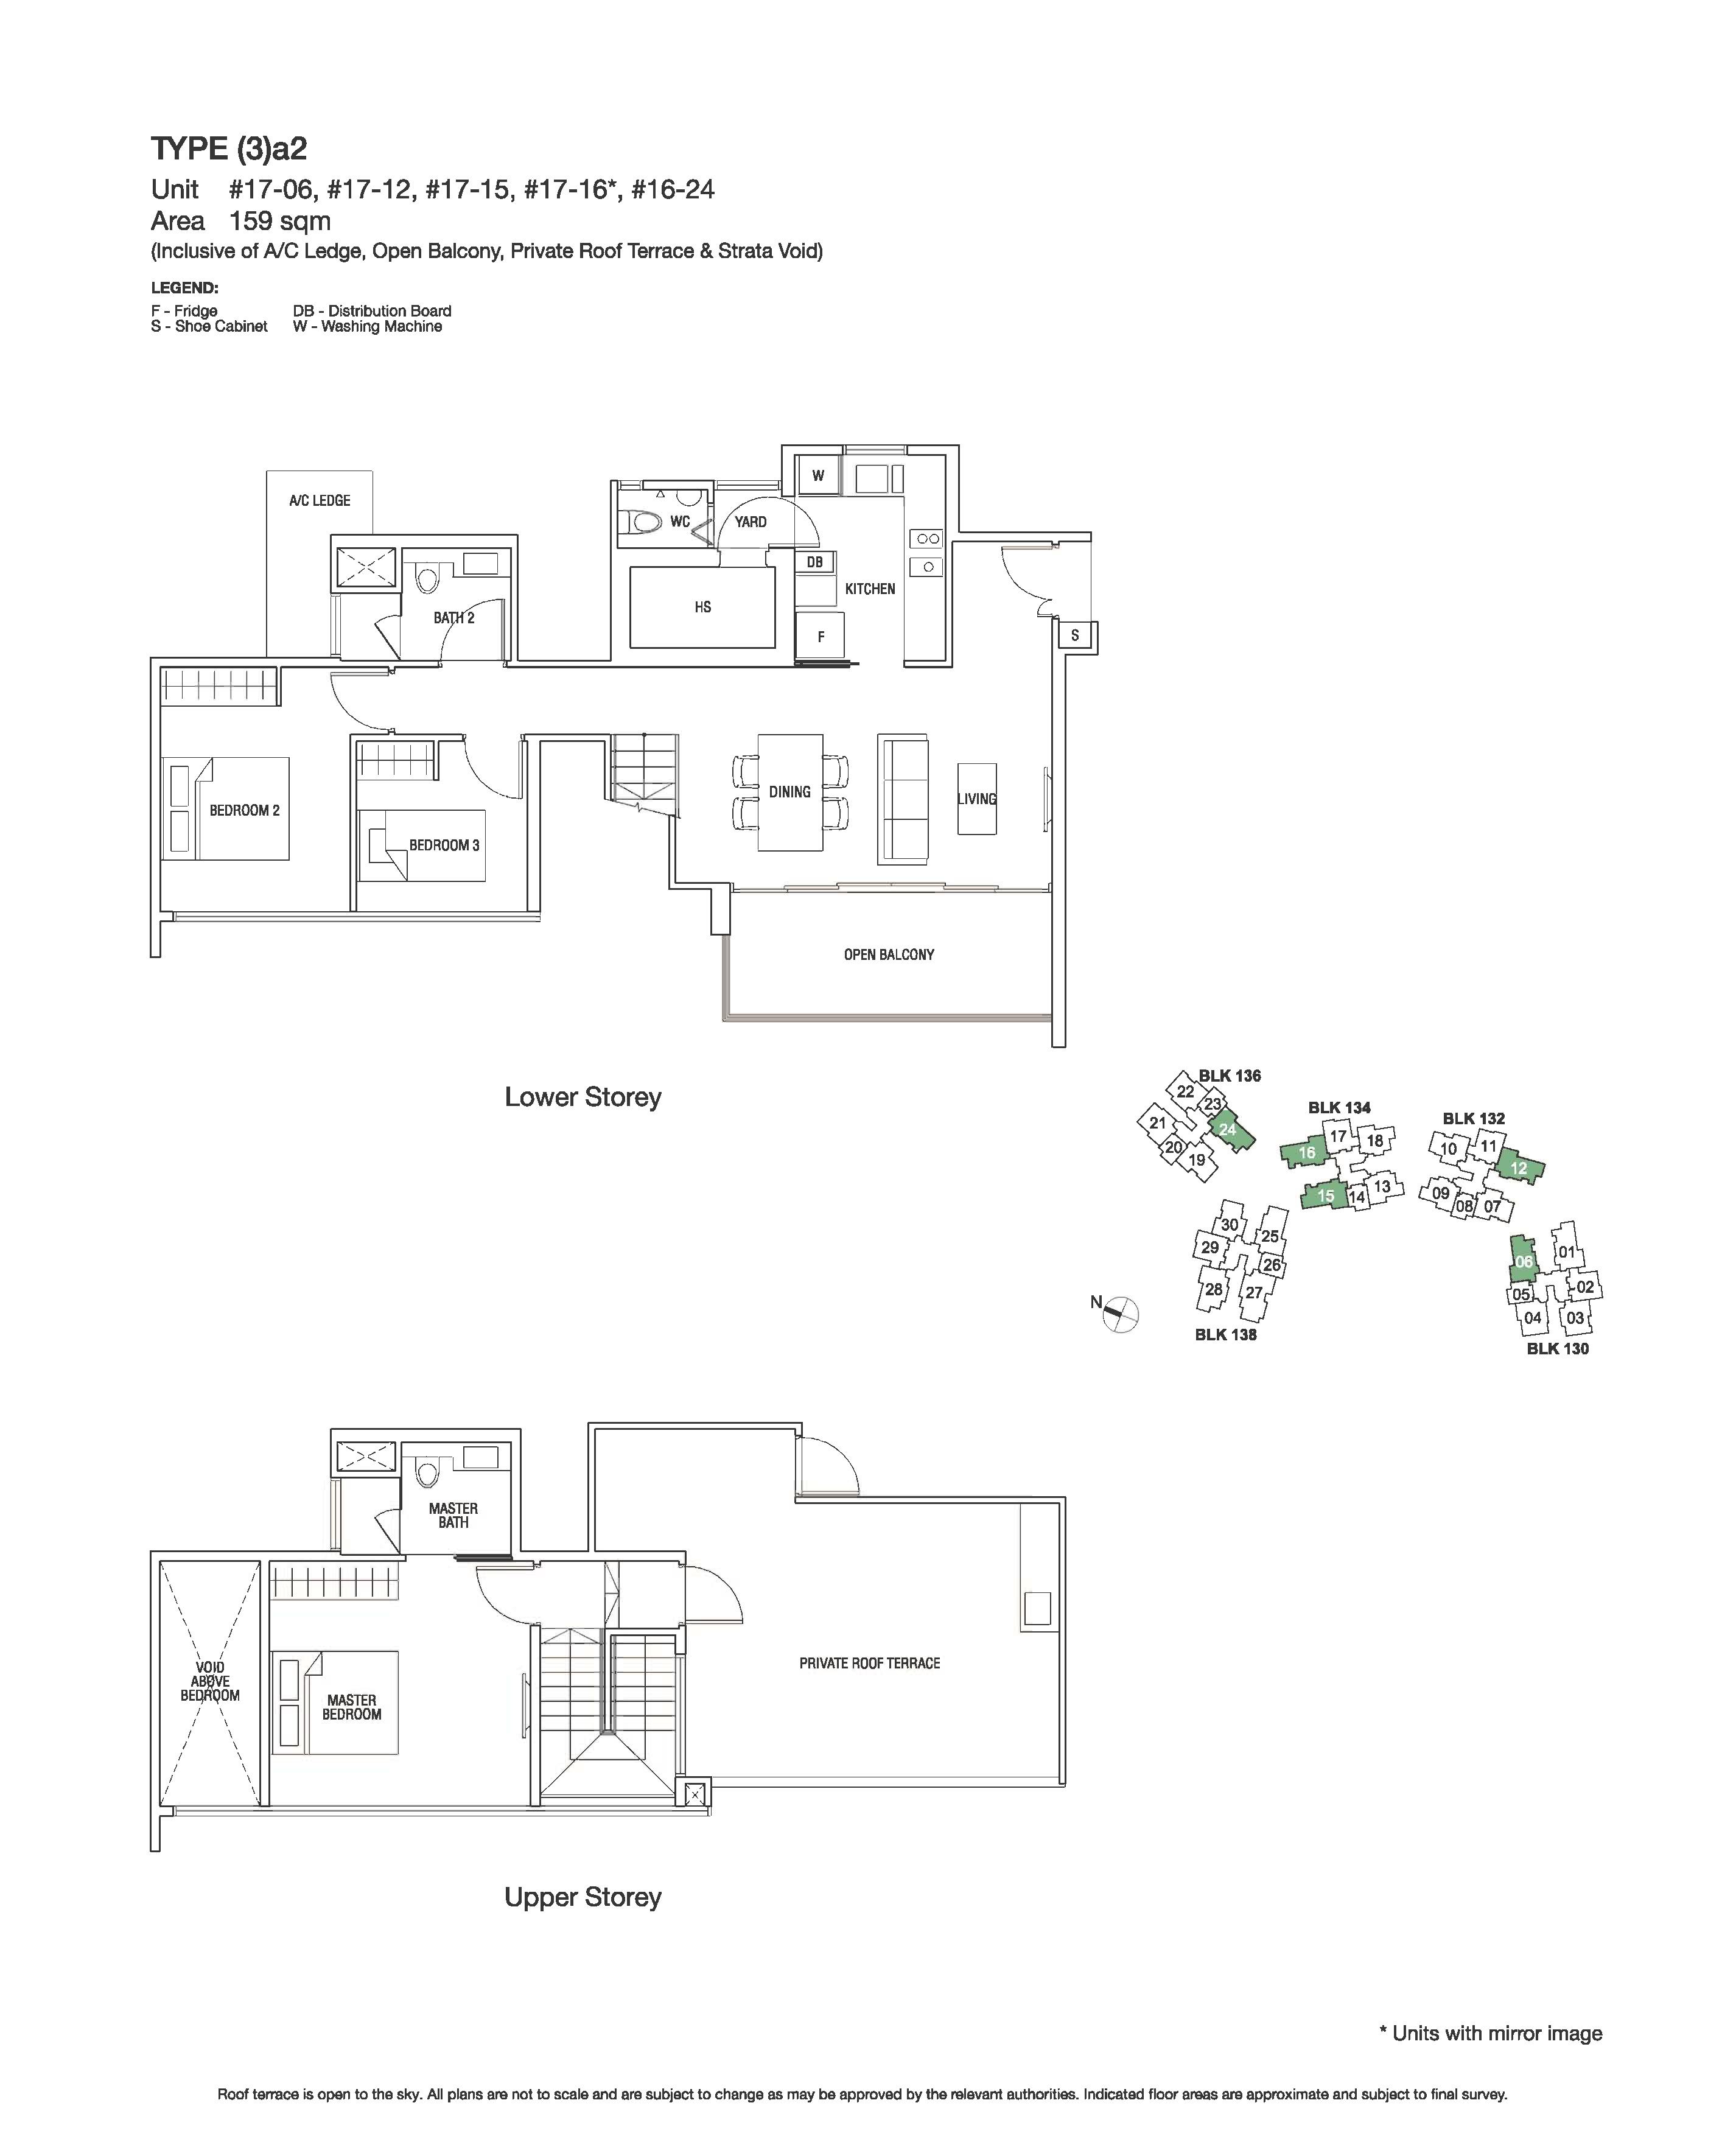 The Scala 3 Bedroom Penthouse Floor Plans Type (3)a2